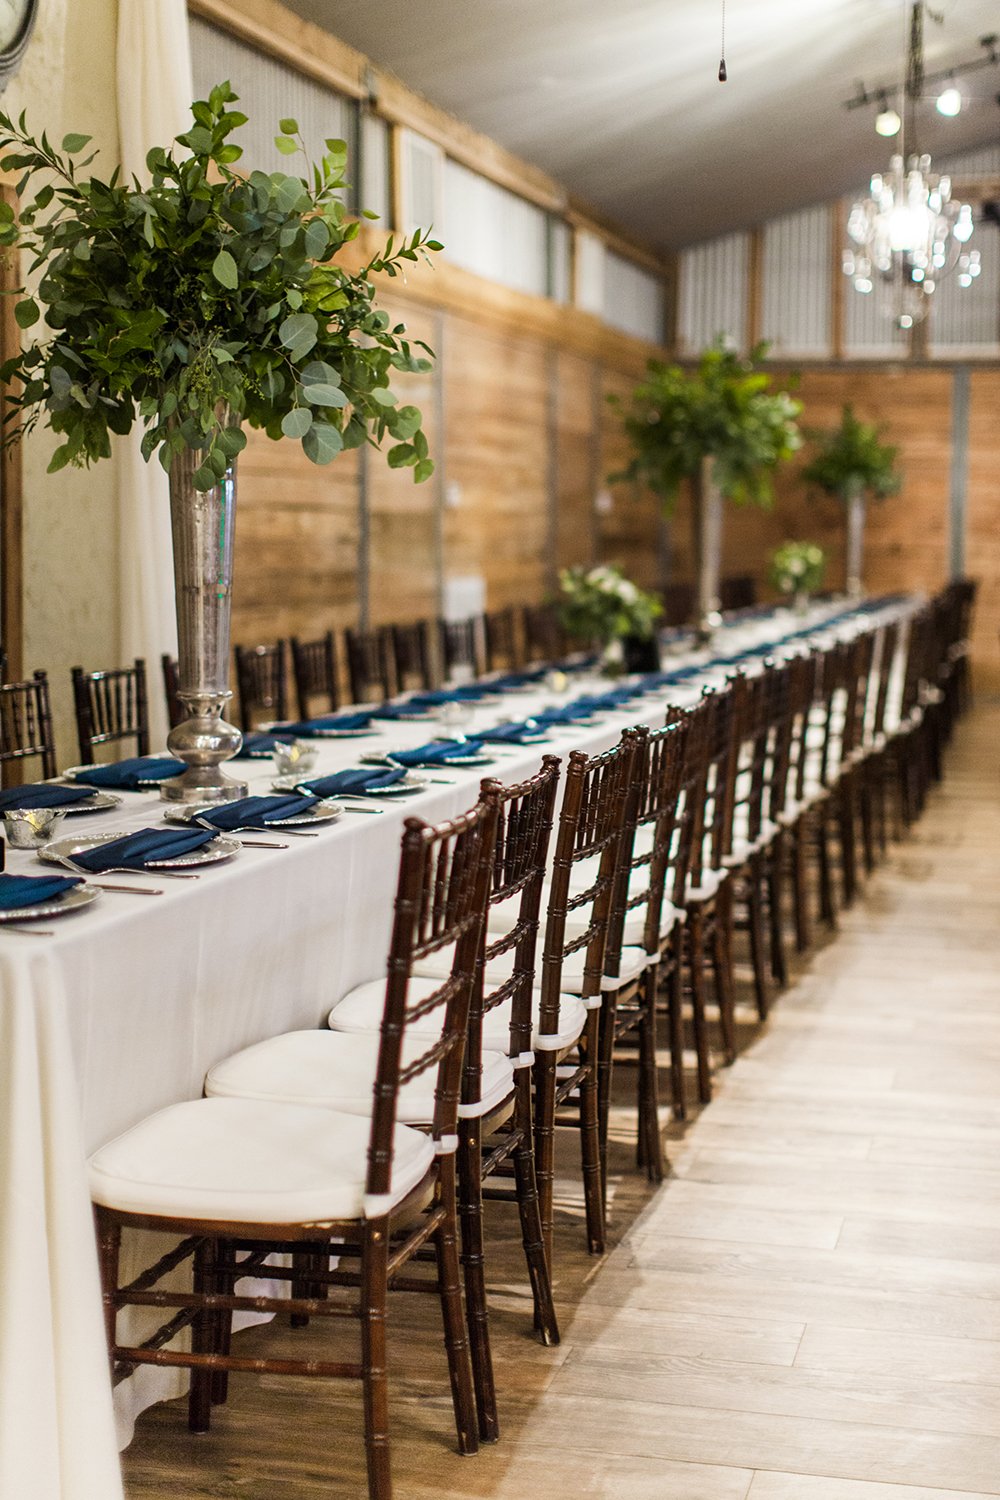 wedding reception - rustic decor and flowers